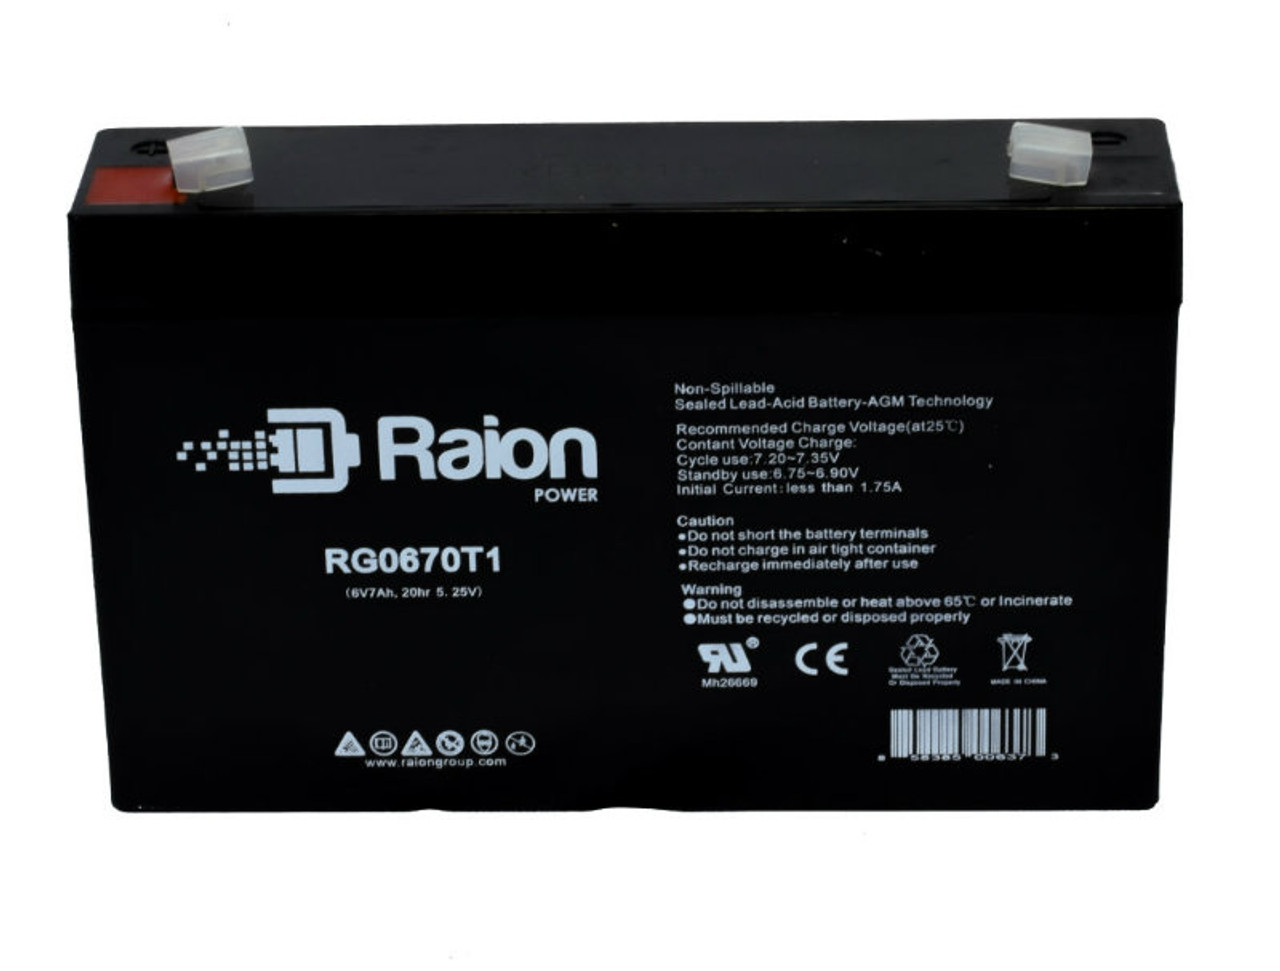 Raion Power RG0670T1 Replacement Battery Cartridge for Lightalarms PL2